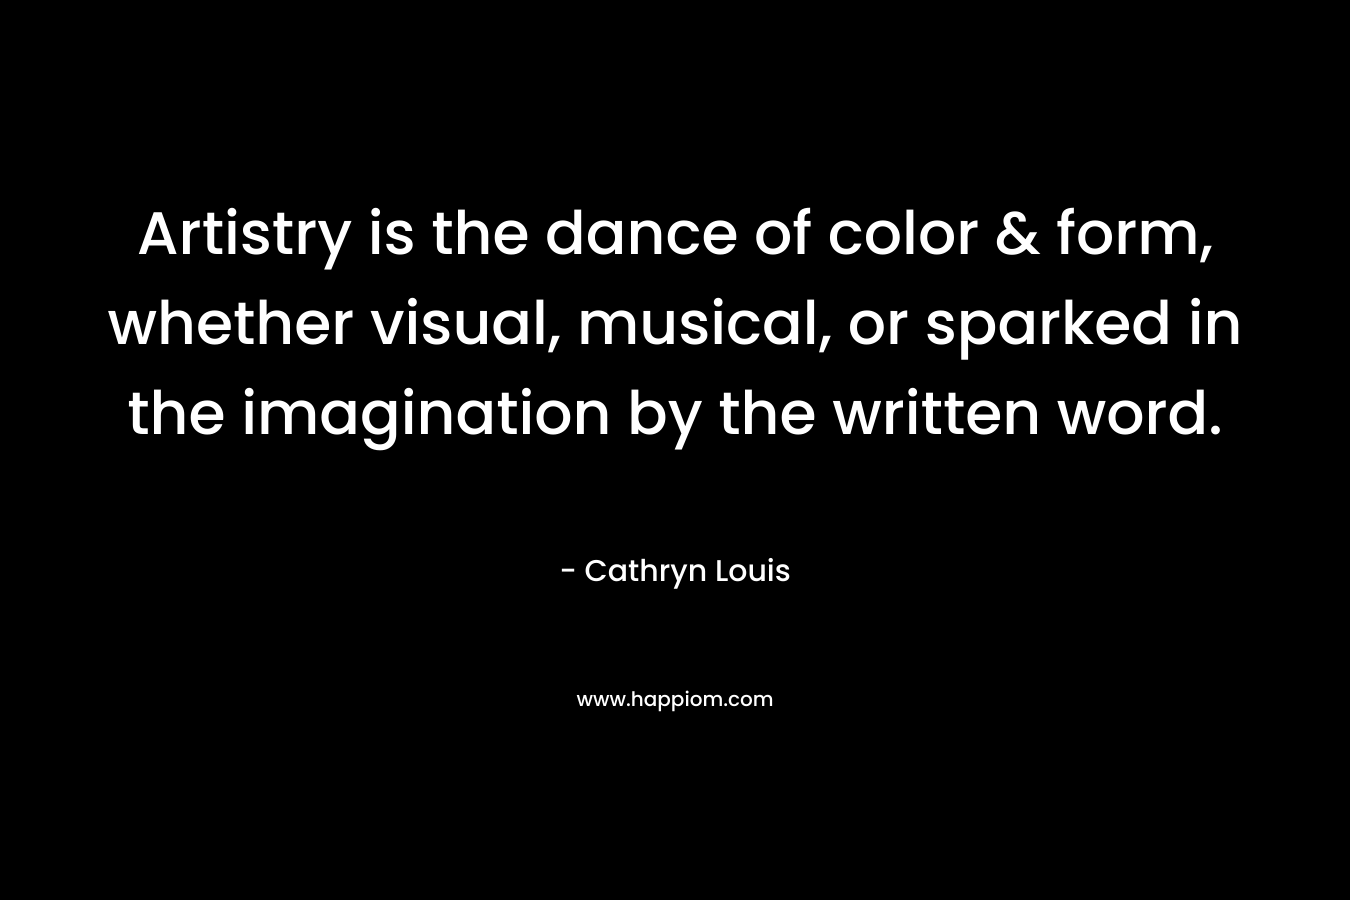 Artistry is the dance of color & form, whether visual, musical, or sparked in the imagination by the written word. – Cathryn Louis